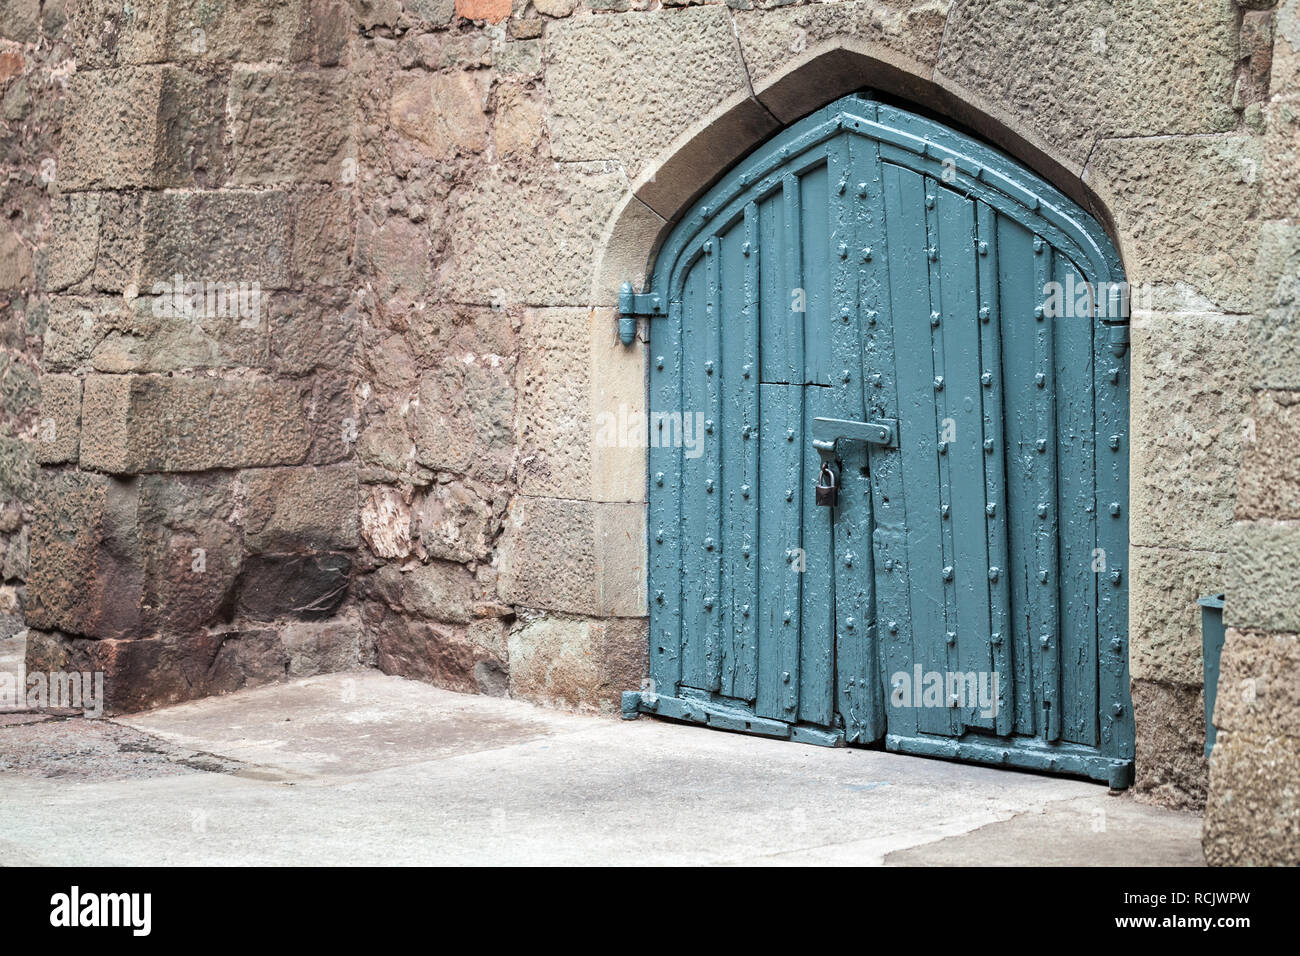 Blue locked gate in old stone wall, ancient Arabic style architecture Stock Photo